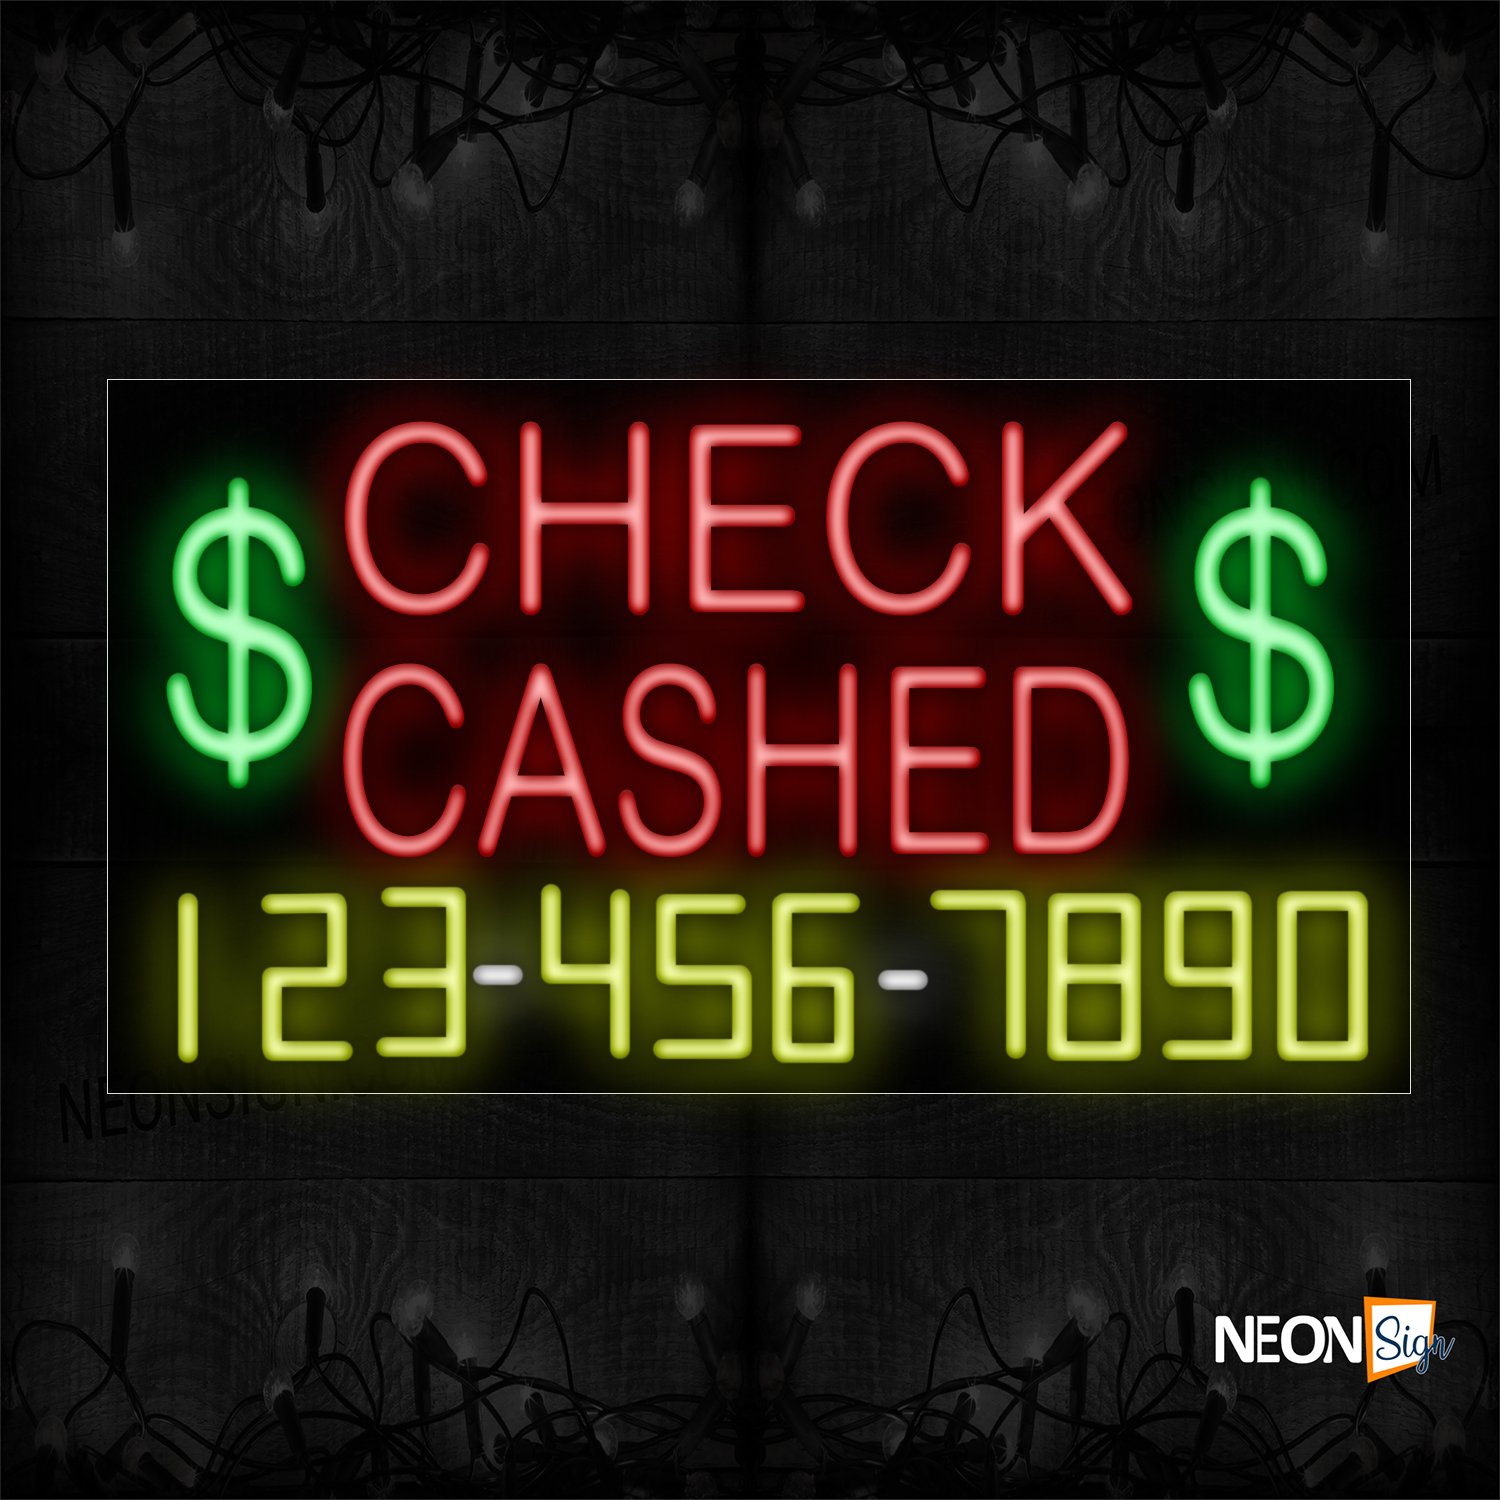 Image of 15057 $ Check Cashed $ And Phone Number Neon Sign_20x37 Black Backing